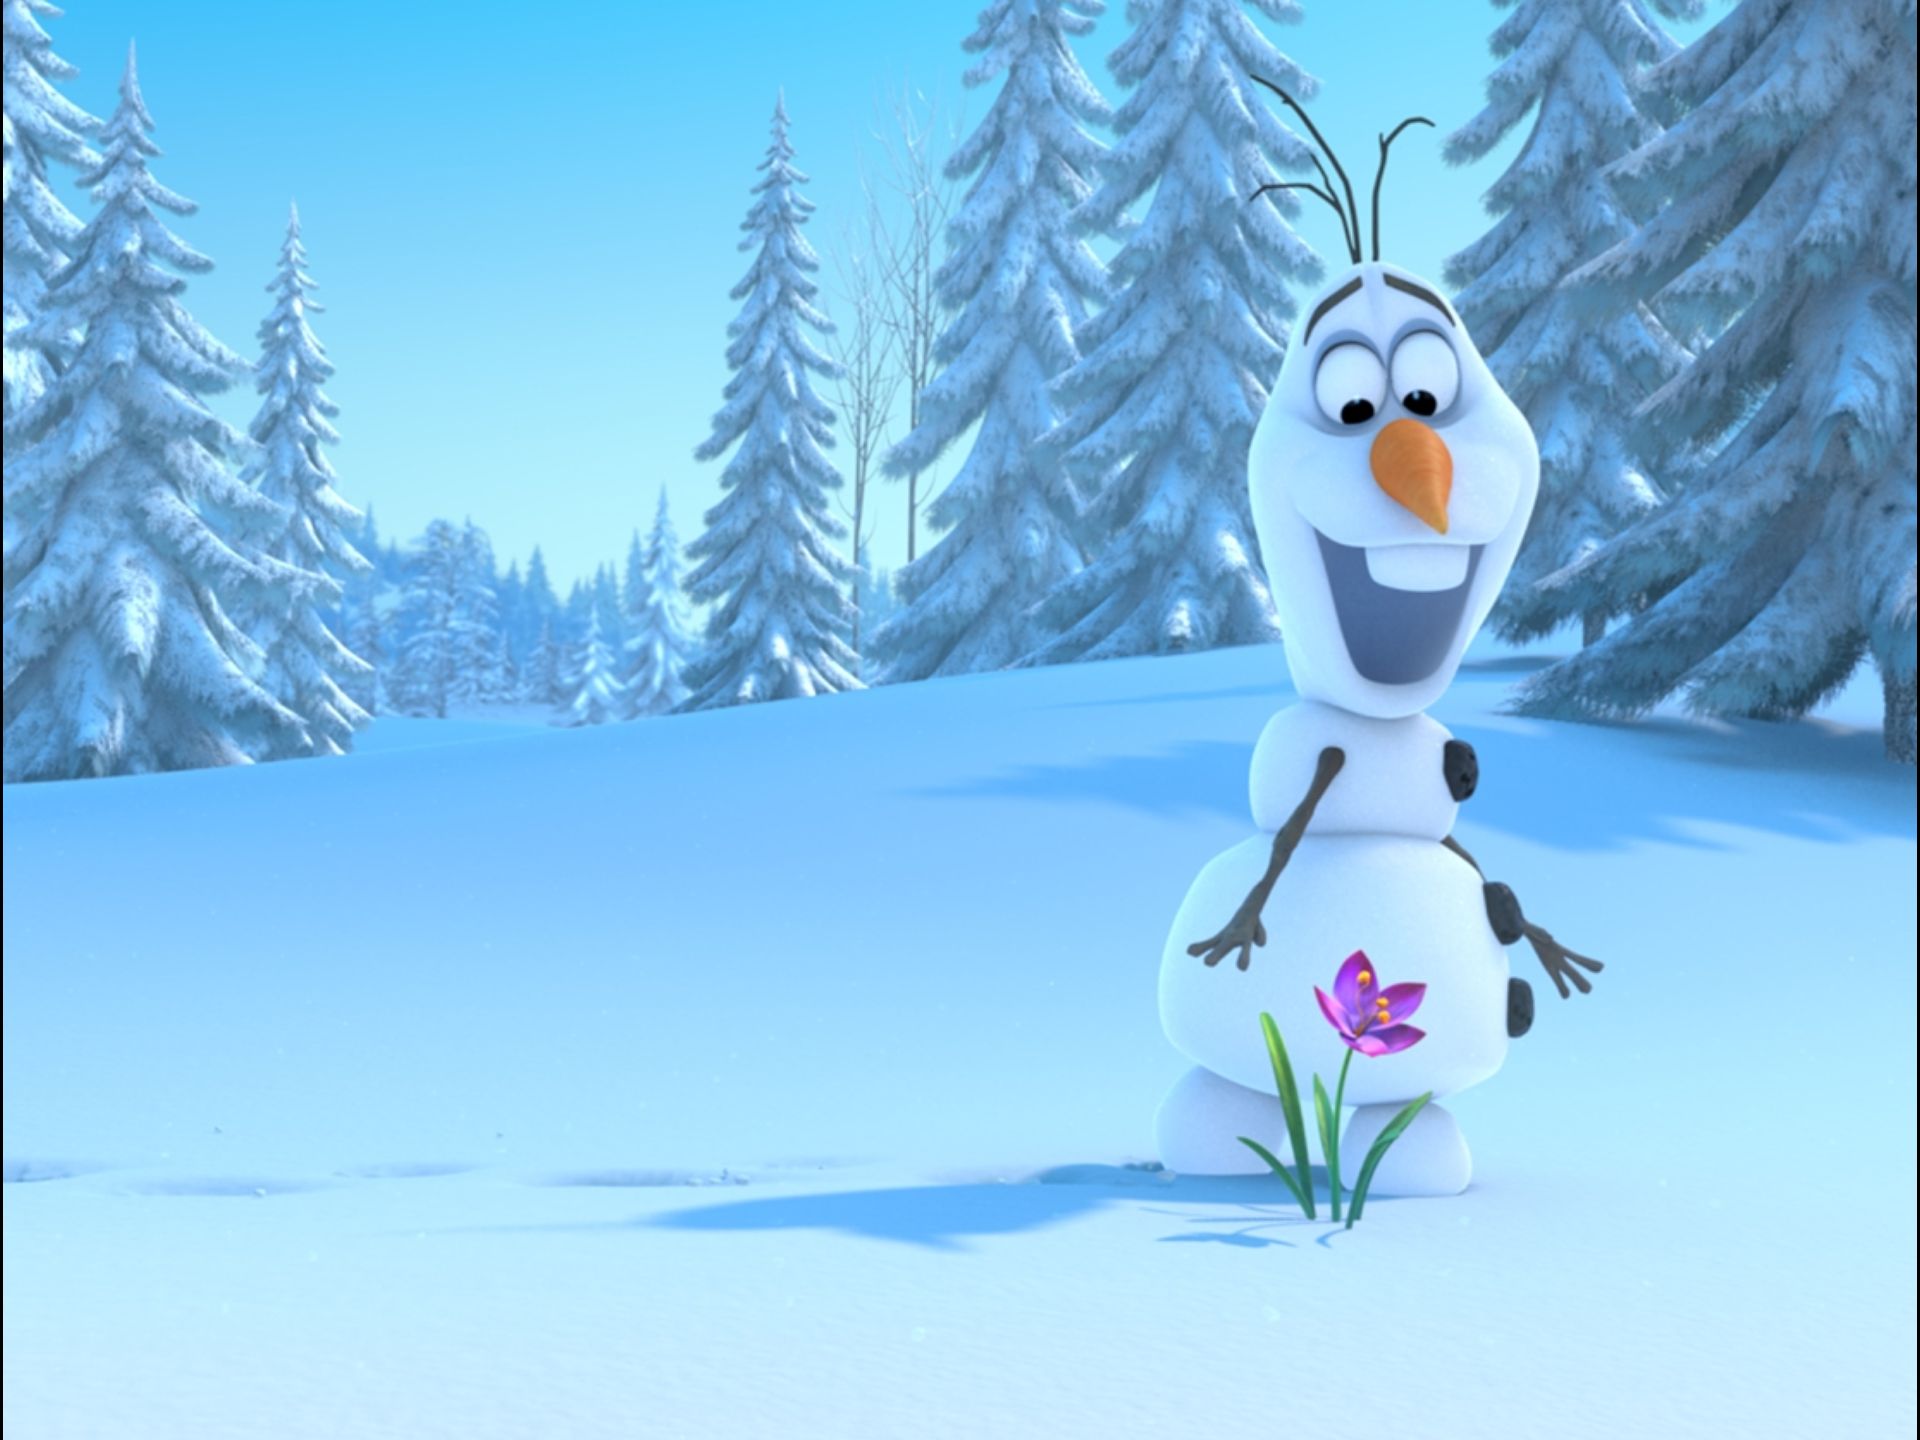 Frozen”: Disney's latest is a stone-cold classic | Madison Movie